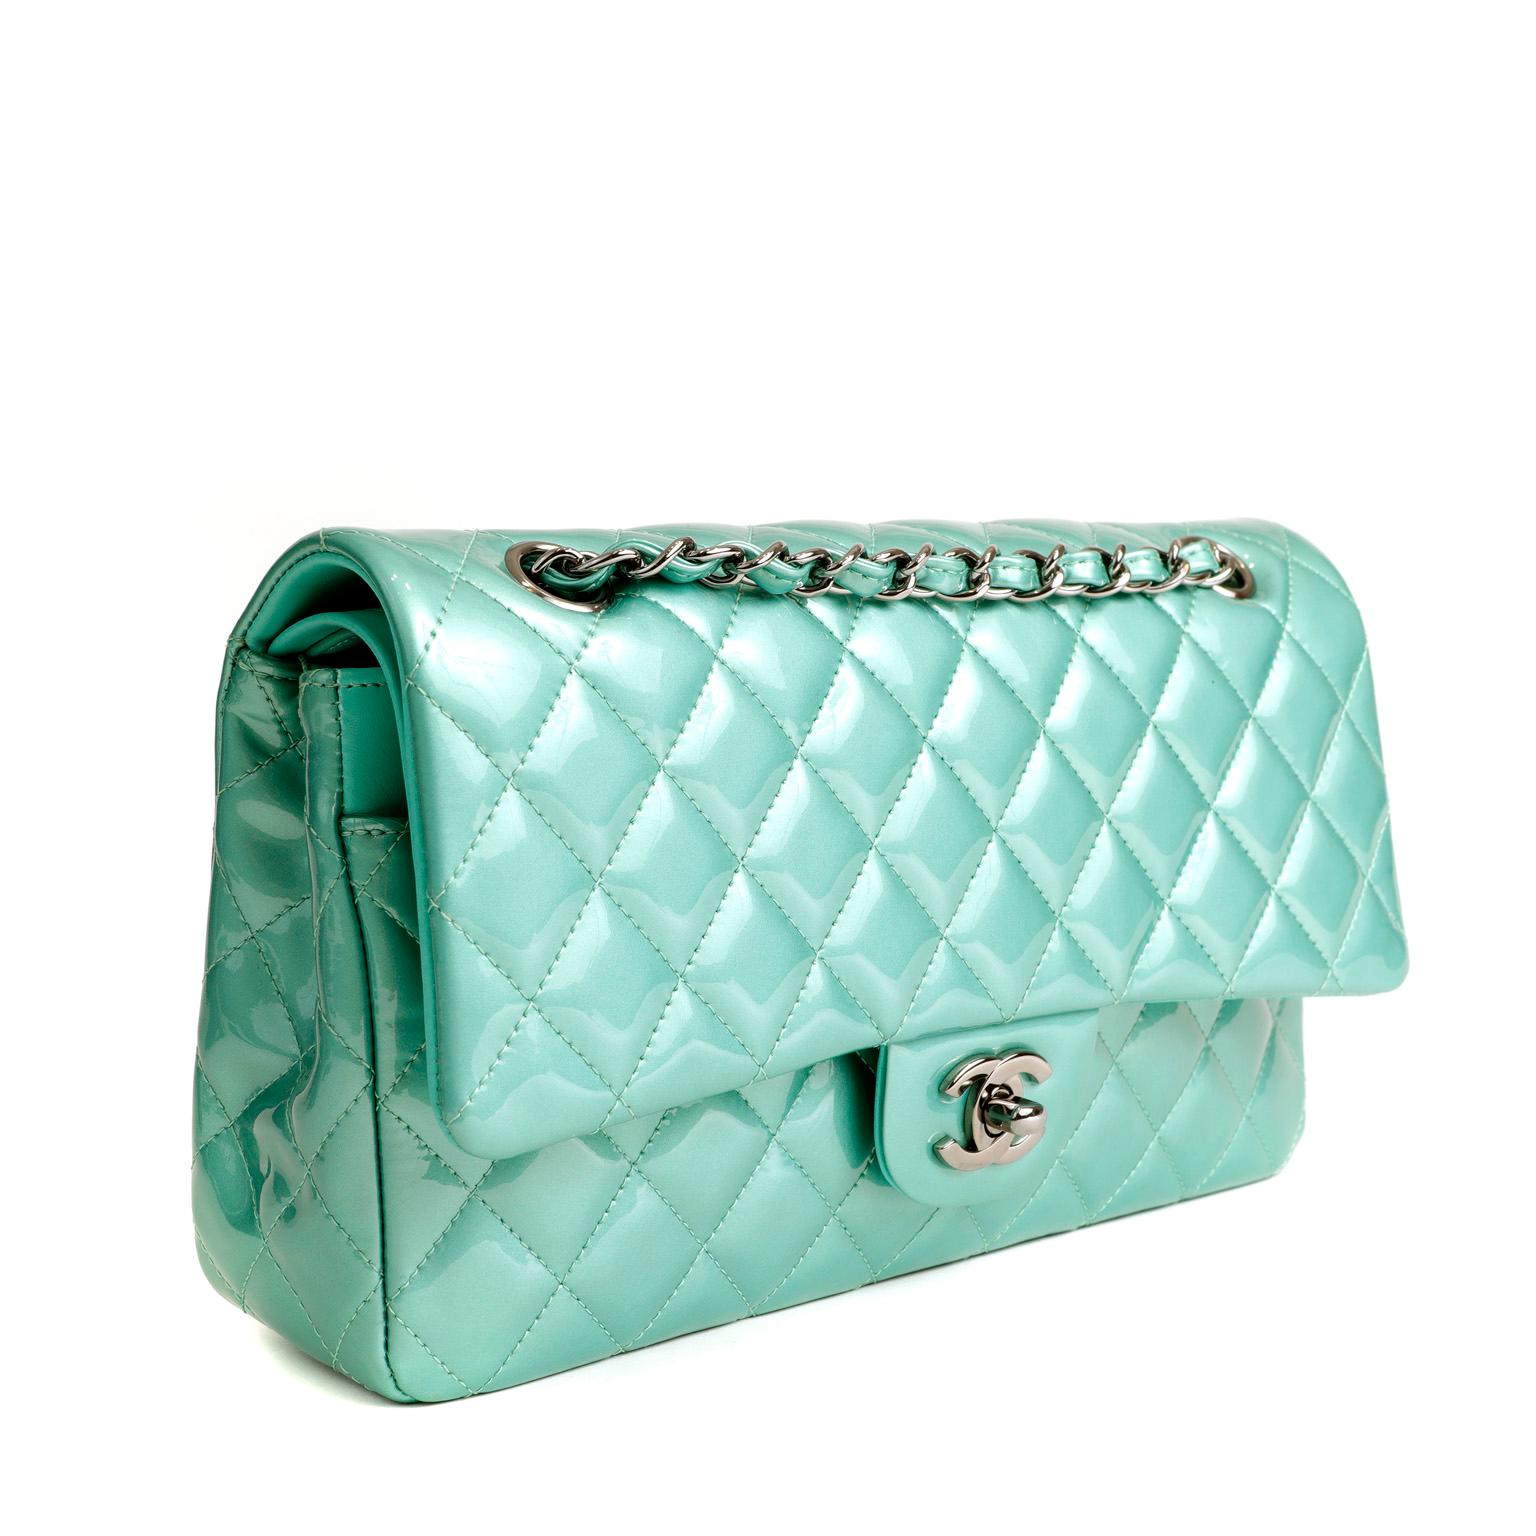 This authentic Chanel Mint Green Patent Leather Medium Classic Flap Bag is in pristine condition, appearing never carried.  A key piece in any sophisticated wardrobe, the Classic Flap is one of the most sought-after Chanel styles produced.
Durable